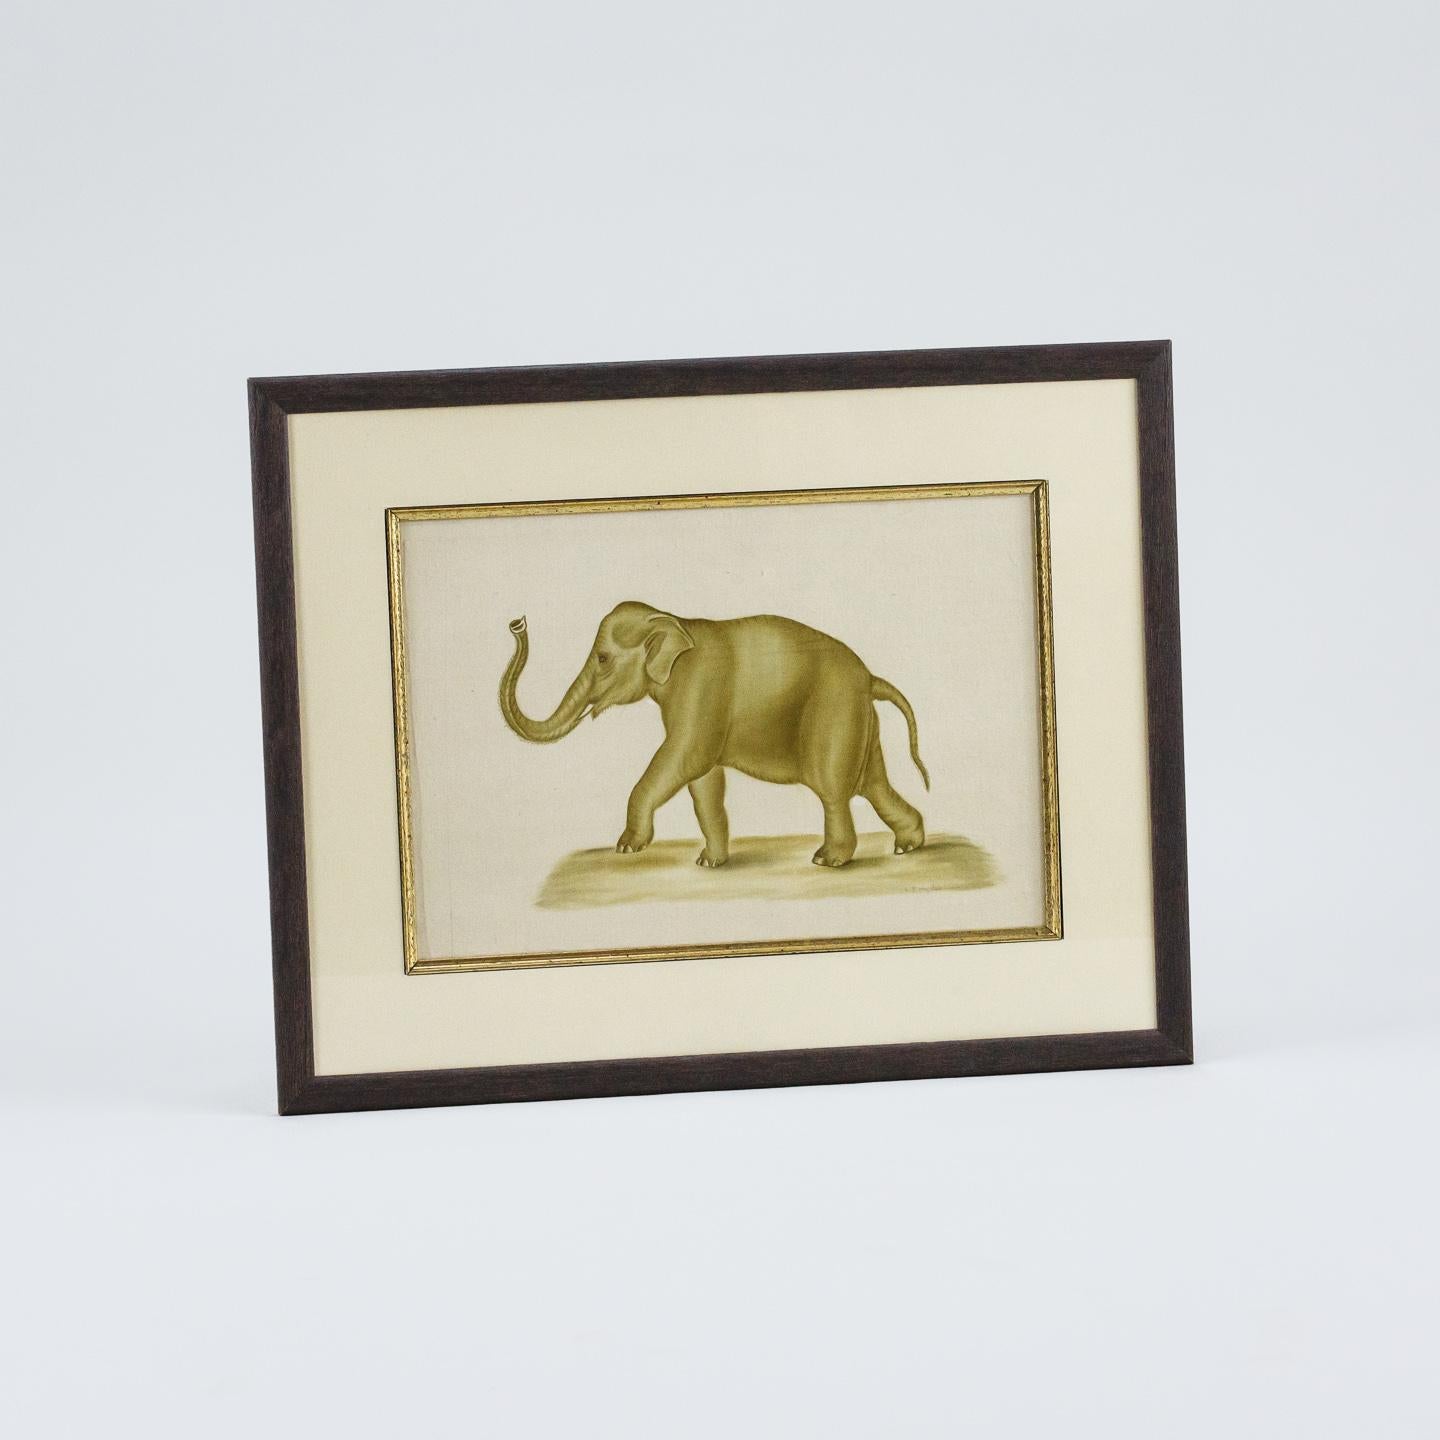 20th Century Watercolour of an Elephant in a wonderful trunk up pose by La Roche Lafitte (signed) Circa 1965. France.